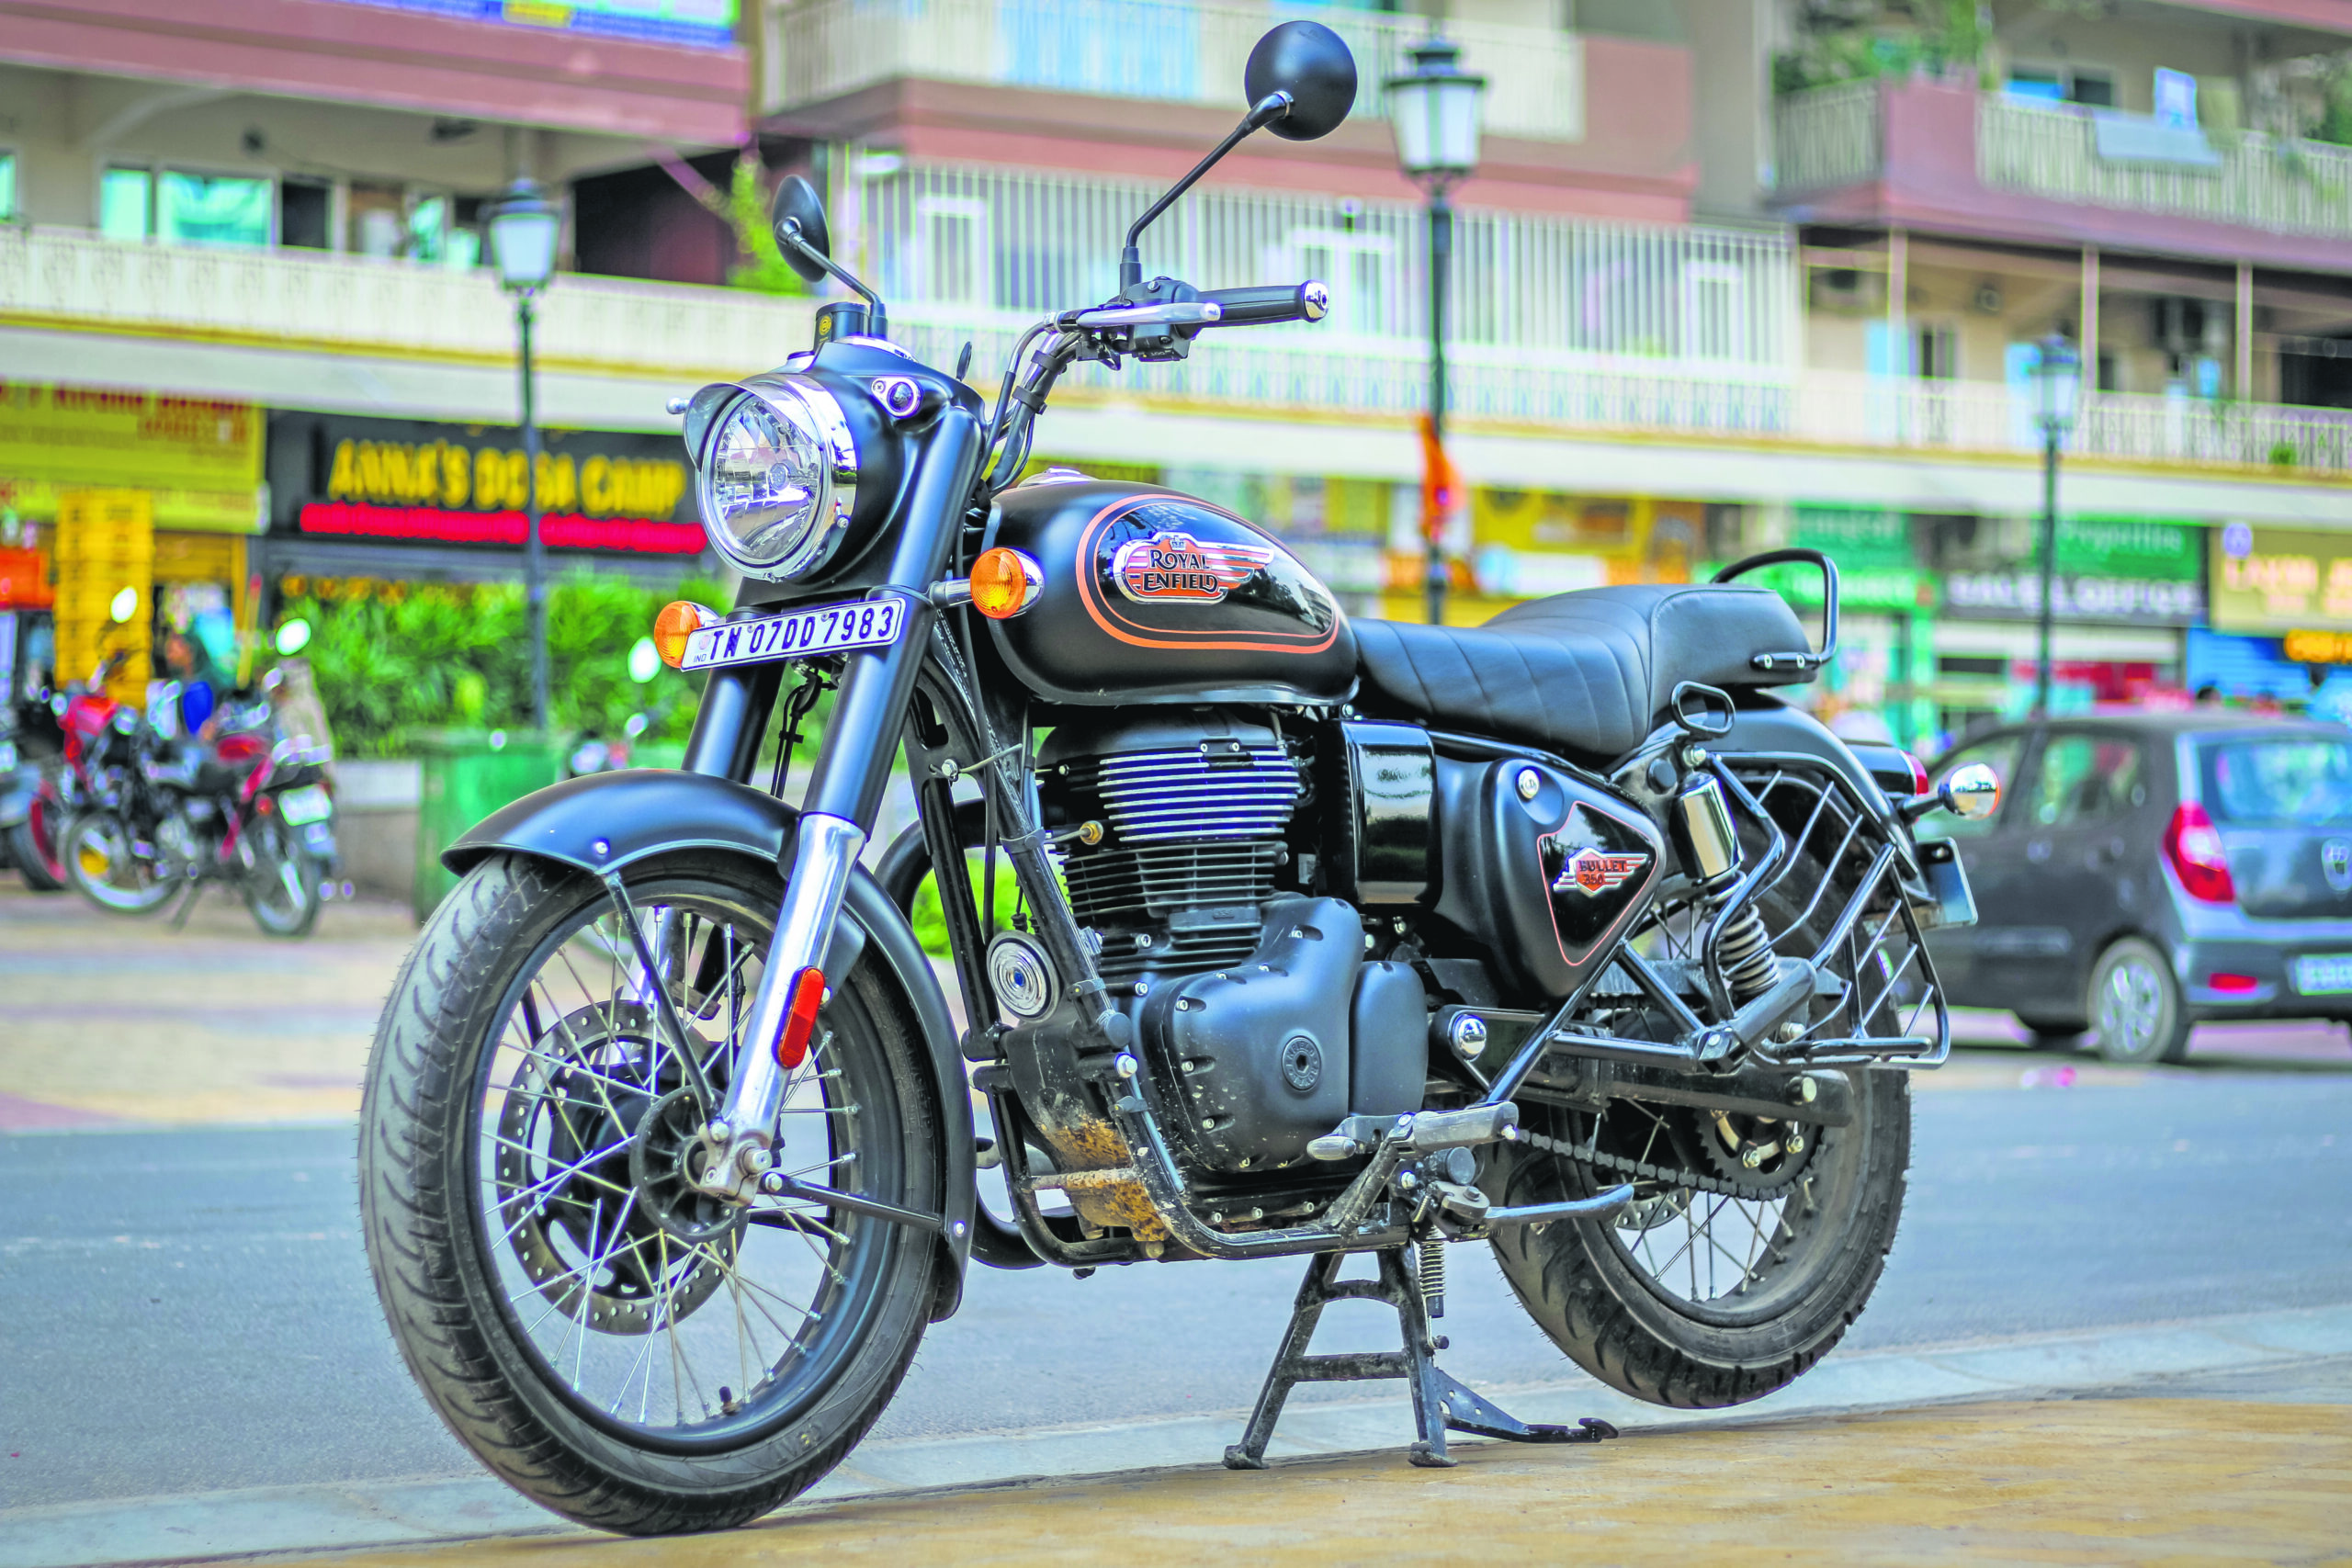 Royal Enfield Bullet 350 Review: Is it really a Bullet or a pretender?